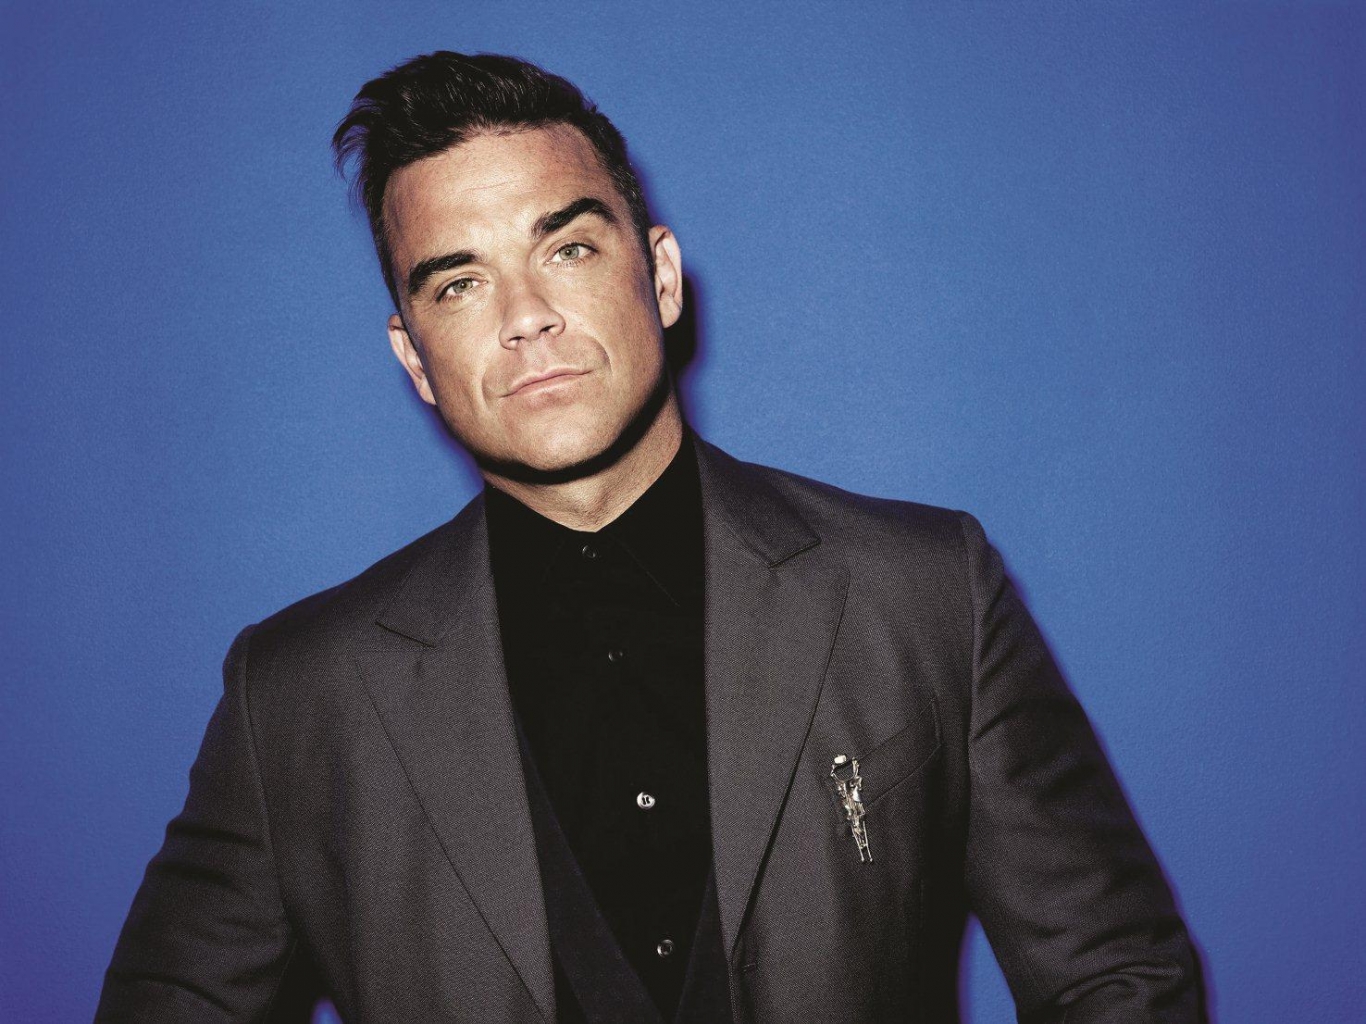 In 2001, Robbie Williams was attacked and thrown off stage while performing a concert in Germany. His attacker was reportedly suffering from psychiatric problems.